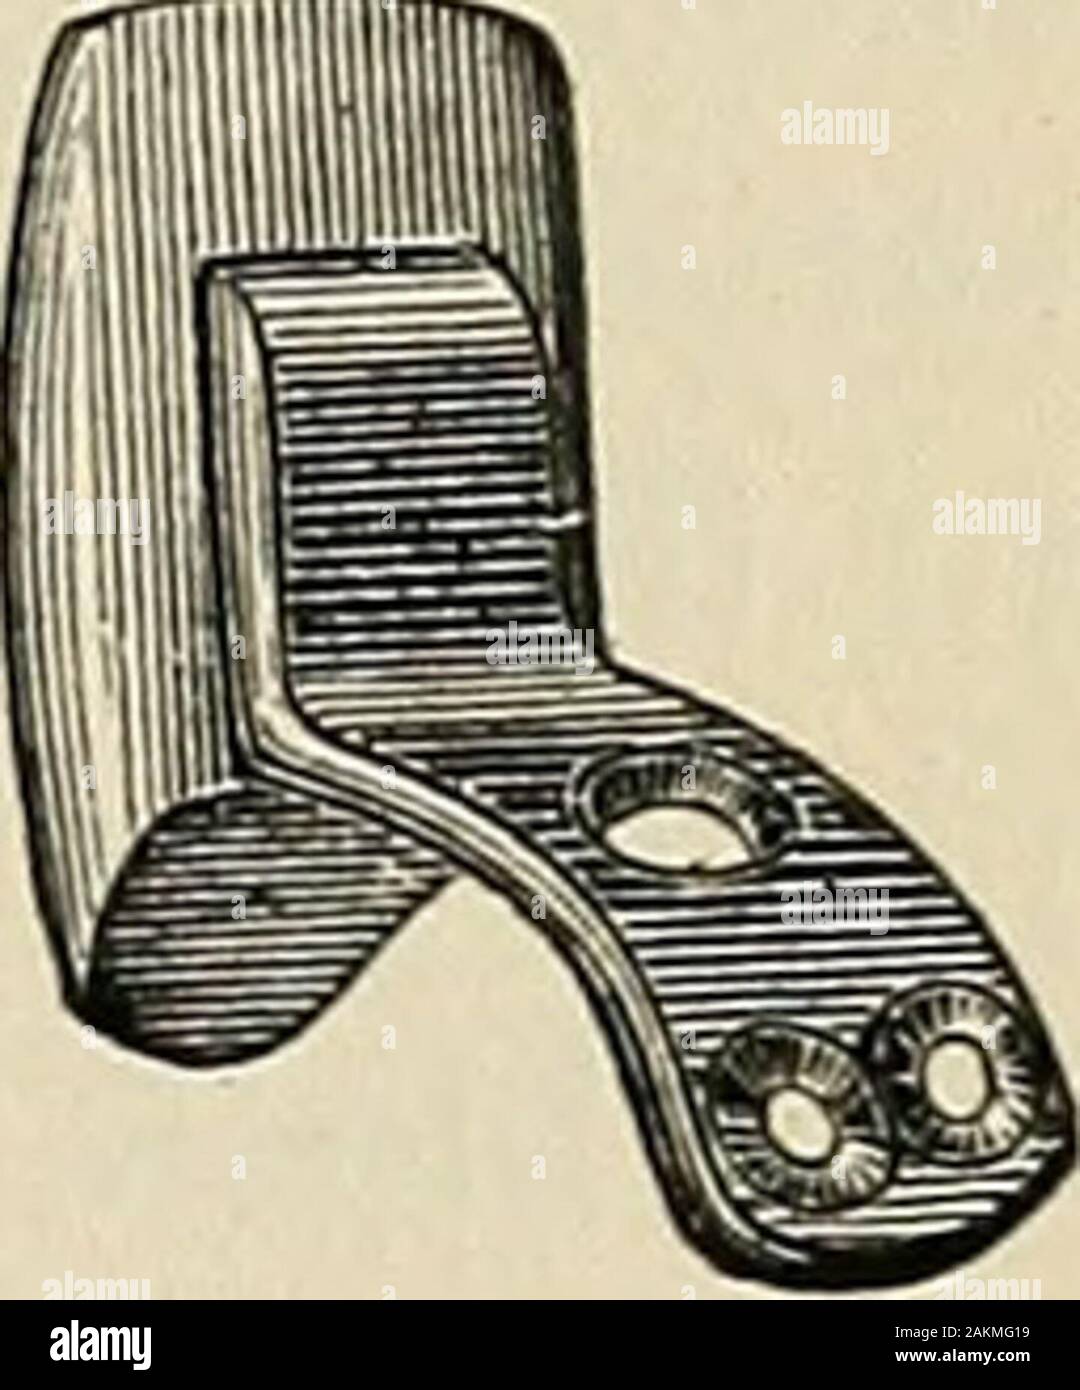 A practical treatise on mechanical dentistry . ing teeth encroachunduly upon the space to be filled, extending nearly to the gum,requiring the tooth of replacement to be as thinly formed through-out its length as possible. Repairing.—If a tooth or block has been broken, or any changeis to be made in the position of either, the teeth or fragmentsthereof are removed, and an irregularly shaped groove or dove-tail formed in the base occupying the space to be supplied; intothis space the tooth or teeth are properly arranged and supportedwith wax; the dovetail is then filled in with wax, giving some Stock Photo